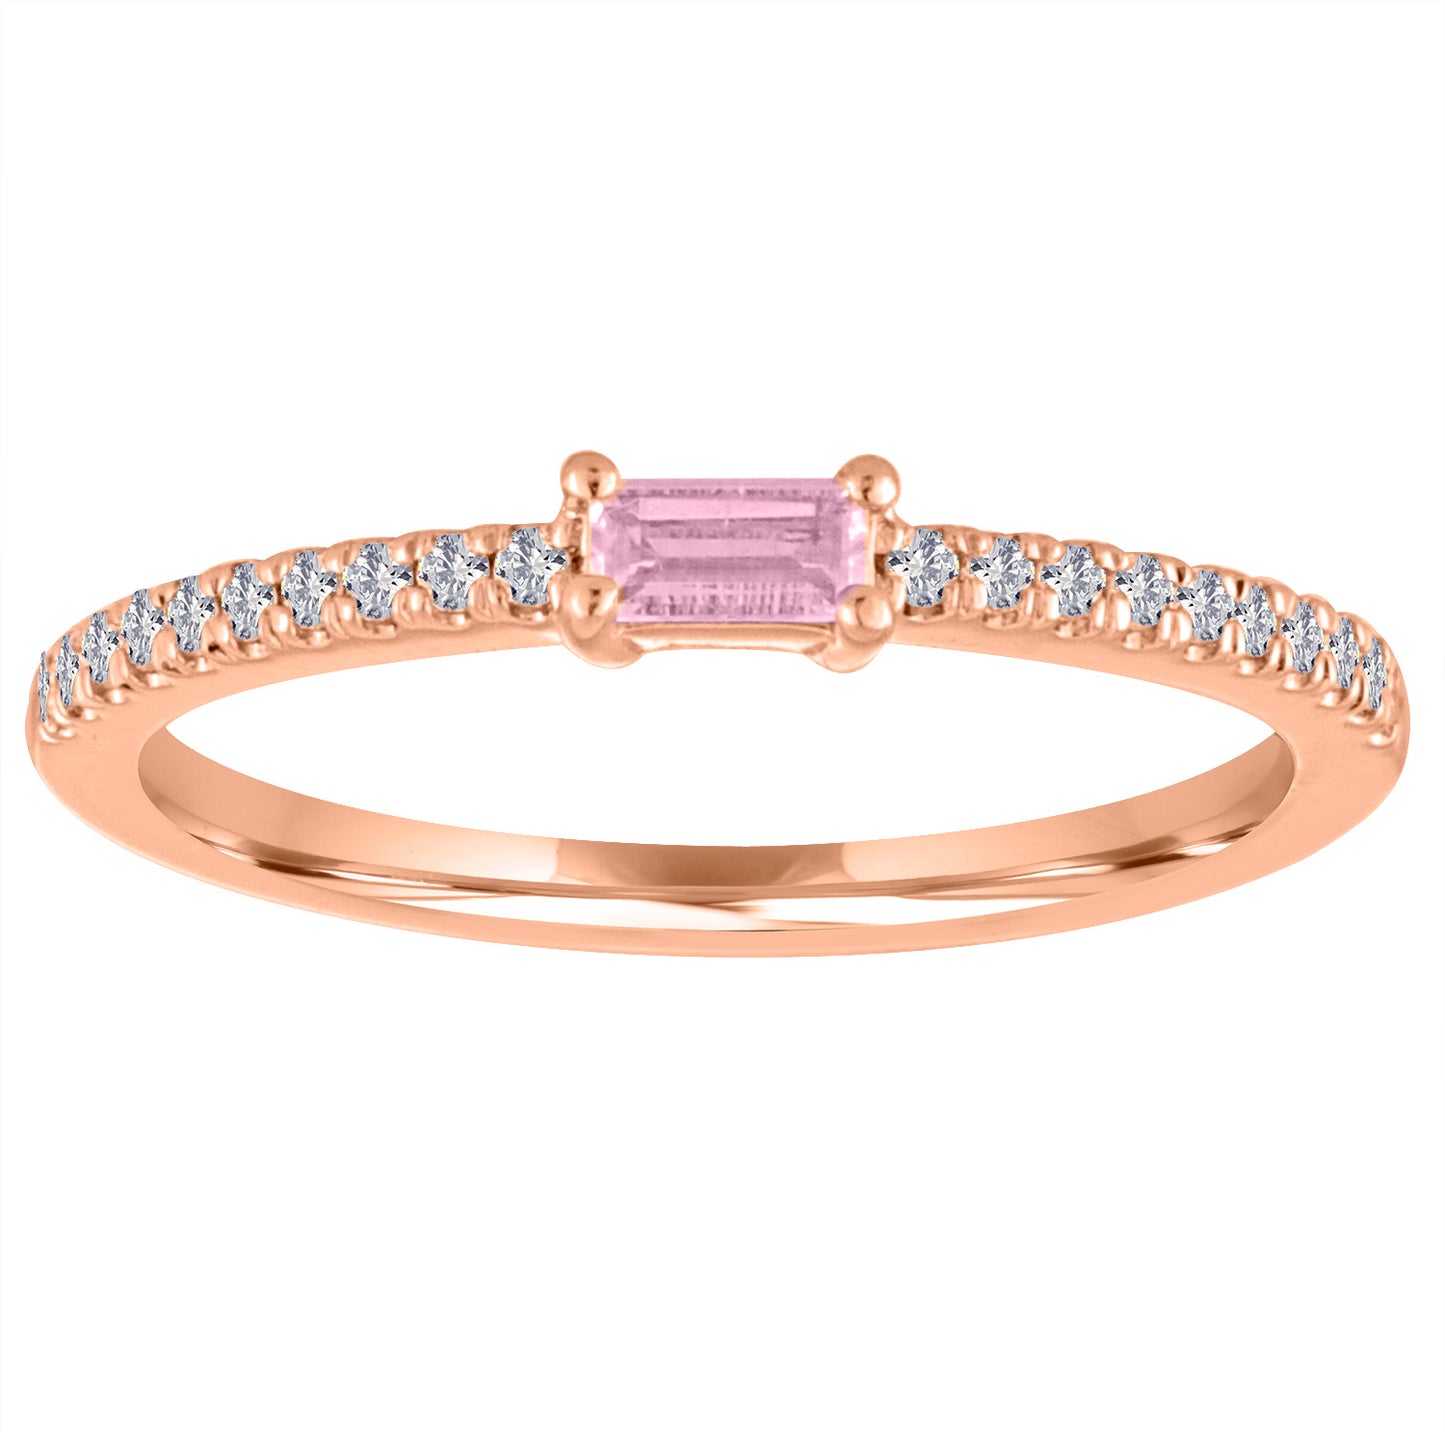 Rose gold skinny band with a pink tourmaline baguette in the center and round diamonds on the shank.